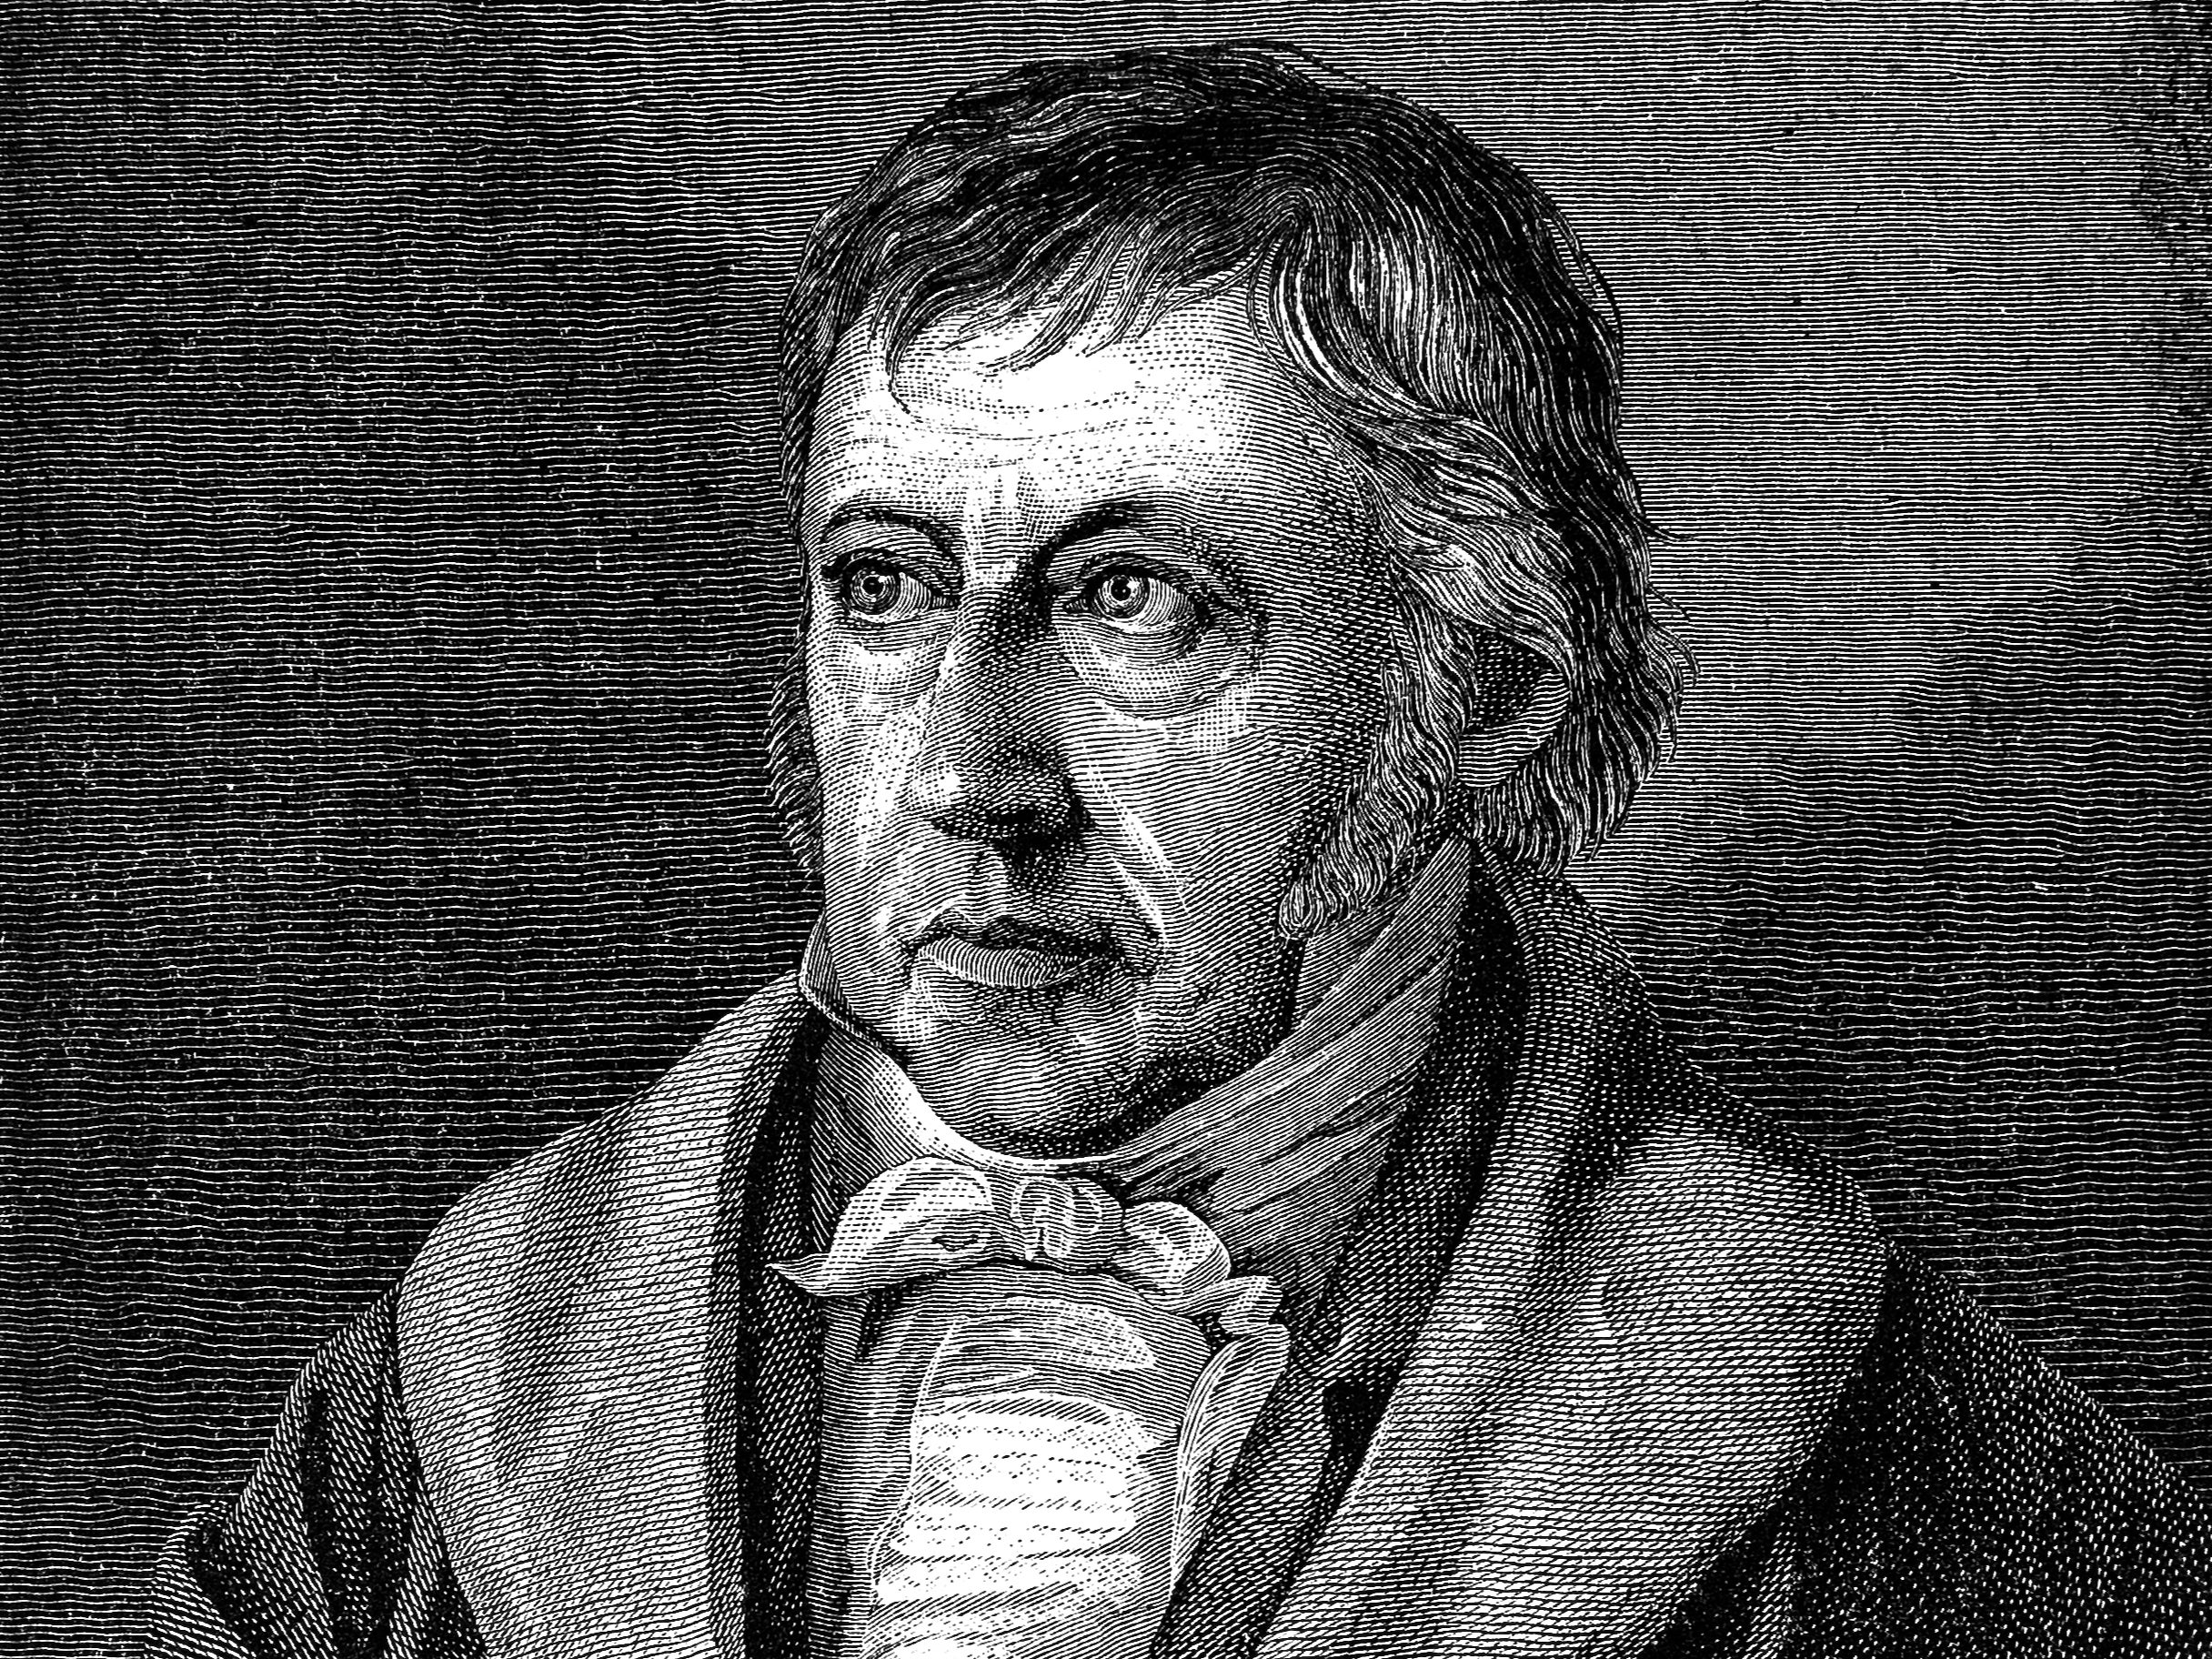 Hegel is arguably the last great system builder in philosophy